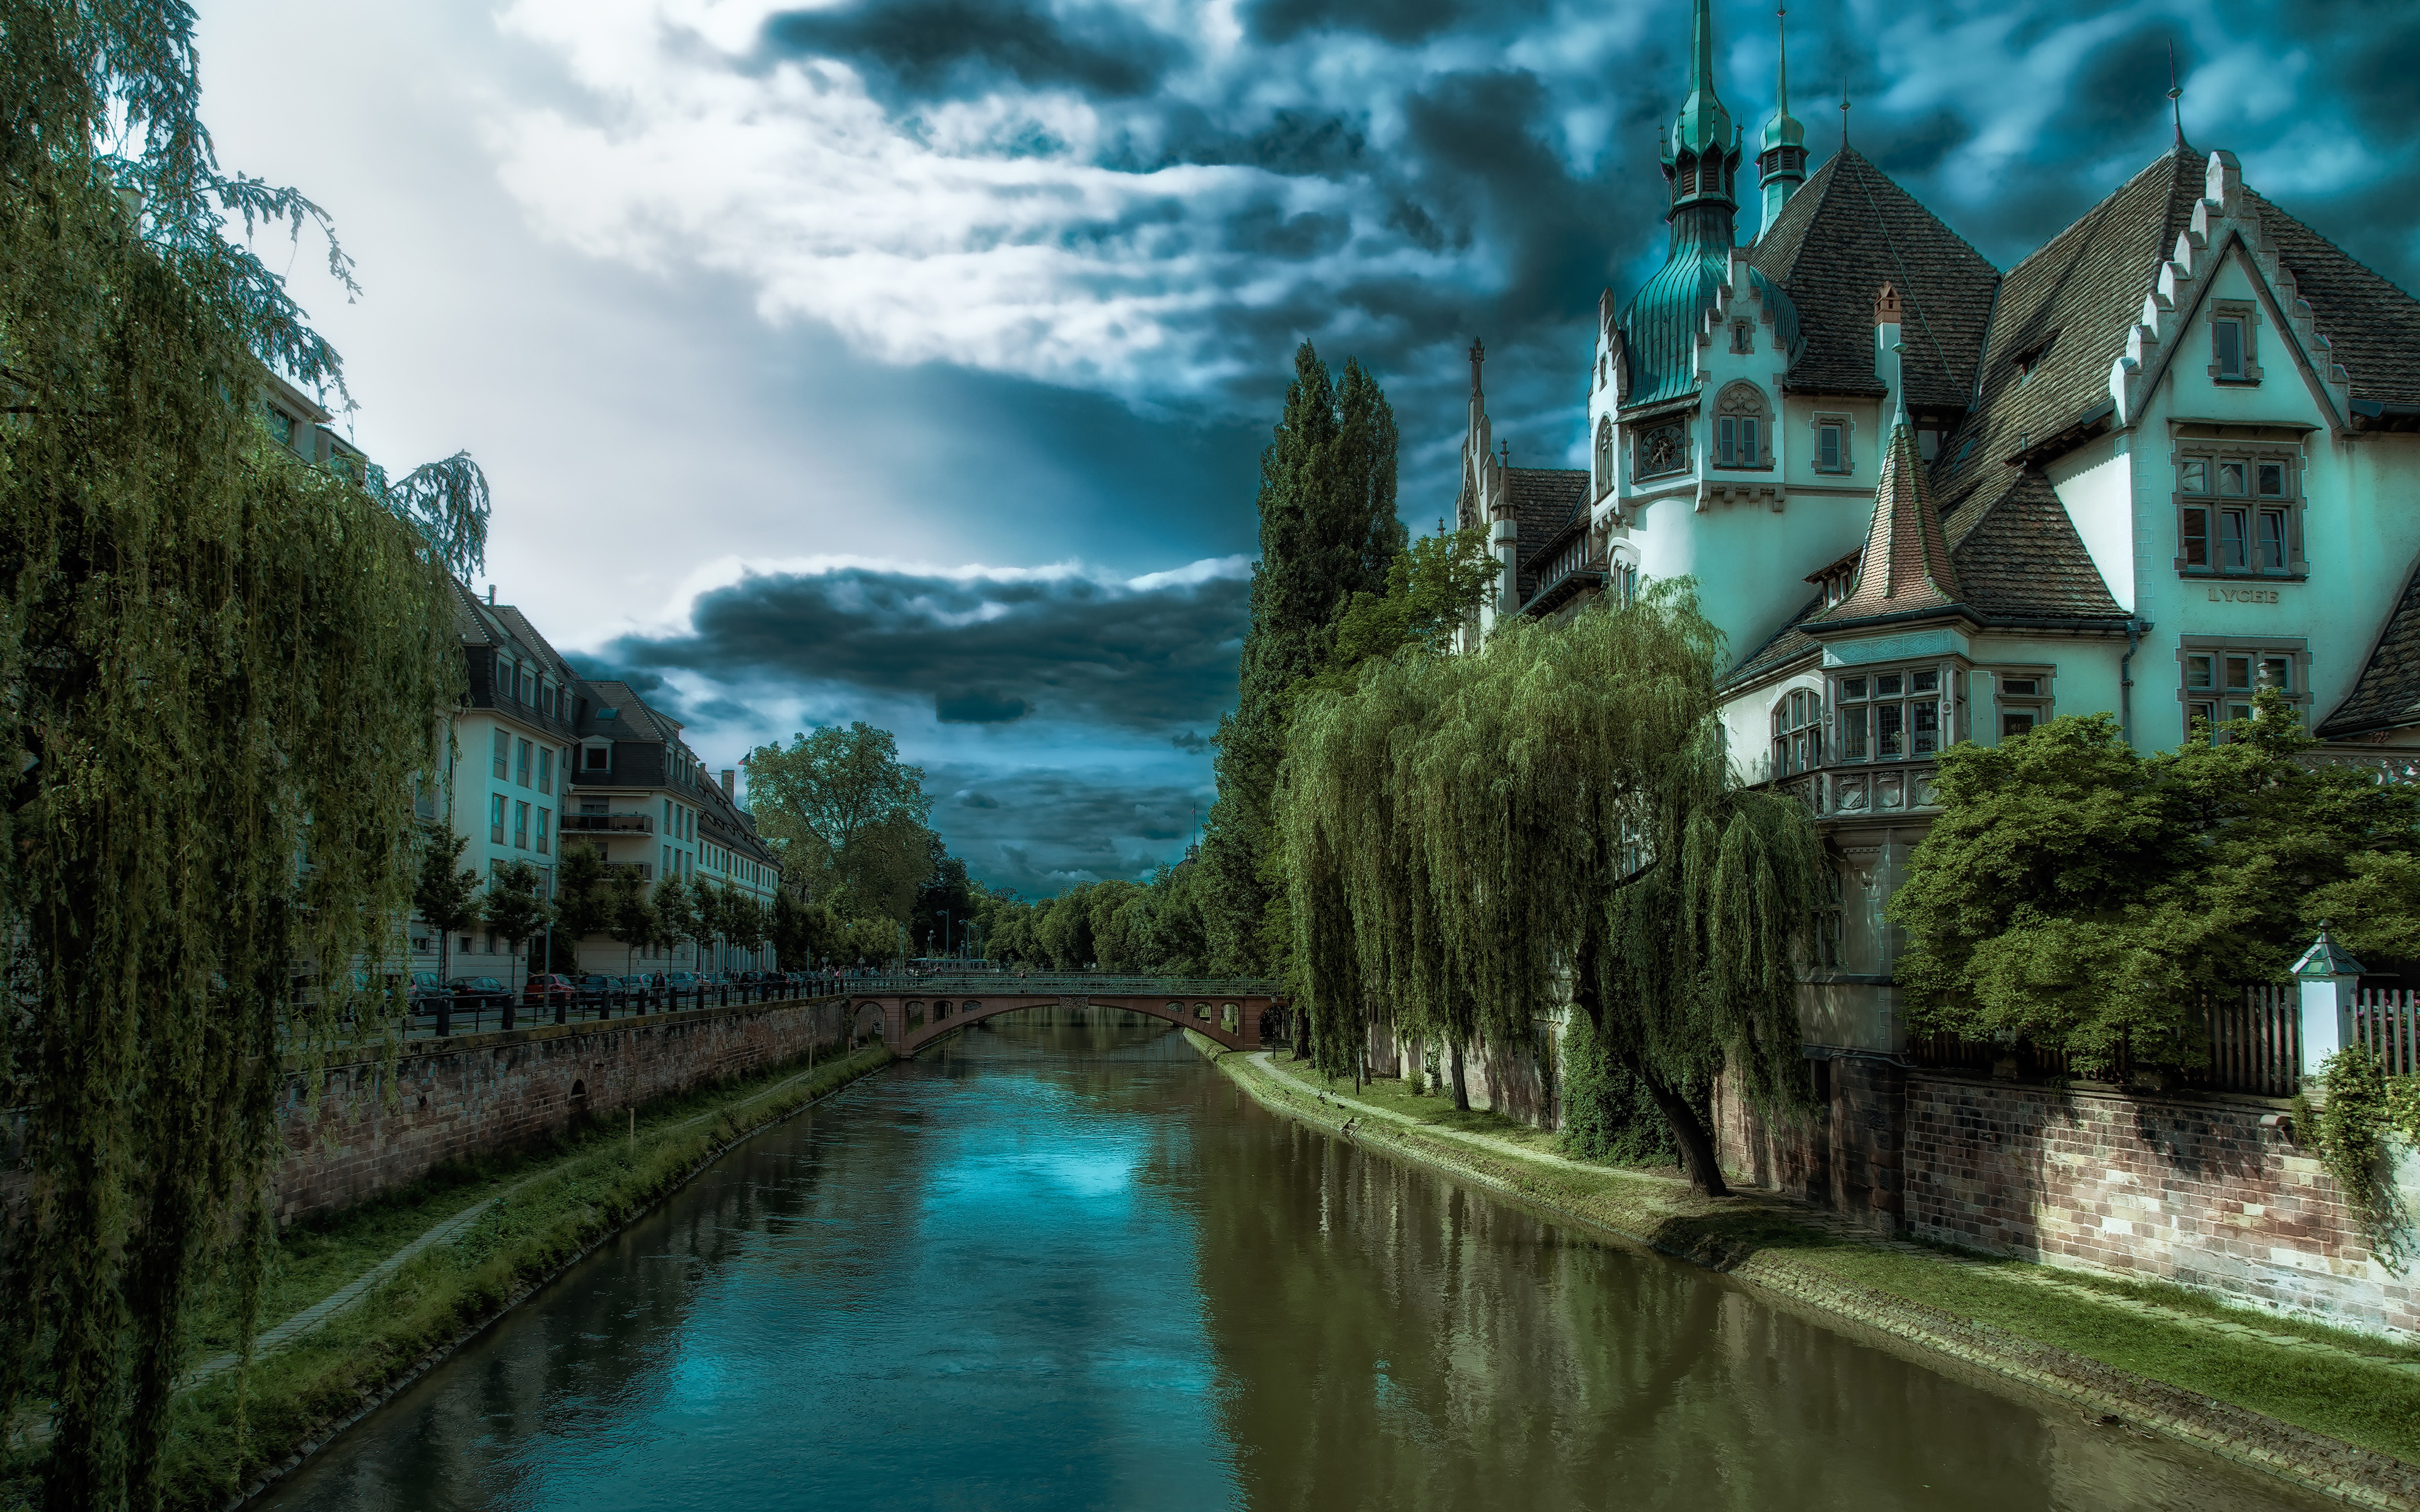 man made, strasbourg, building, river, cities Full HD